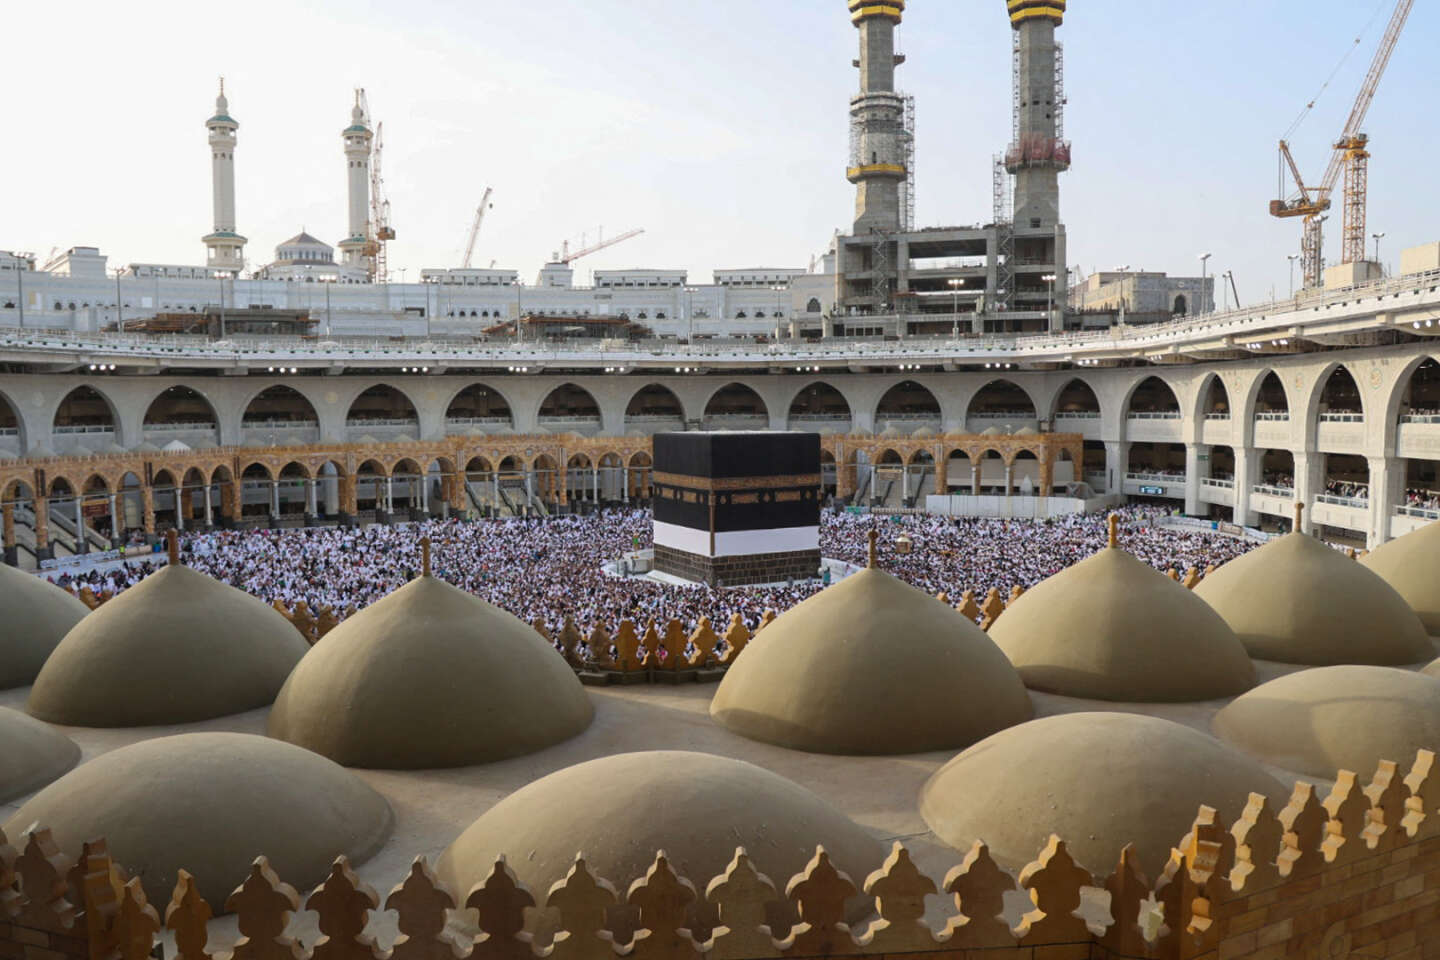 Mecca pilgrimage: 10 things to know about the Kaaba